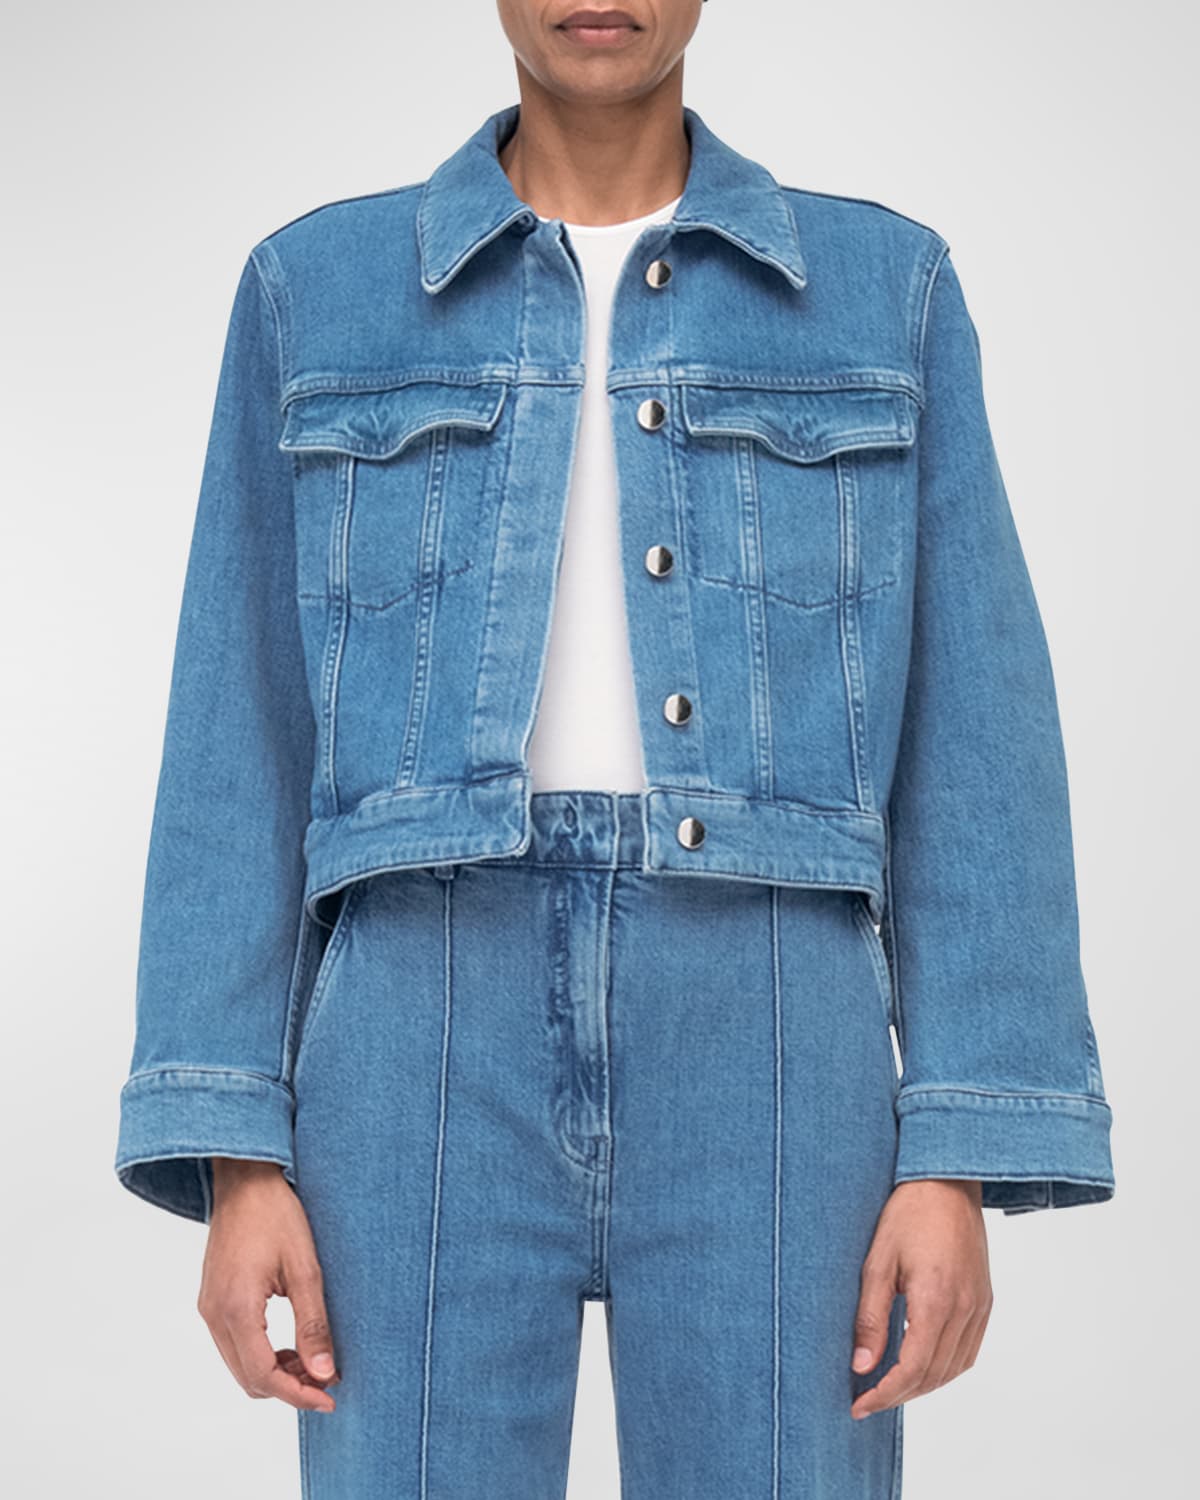 Another Tomorrow Cropped Denim Jacket In Light Blue Wash